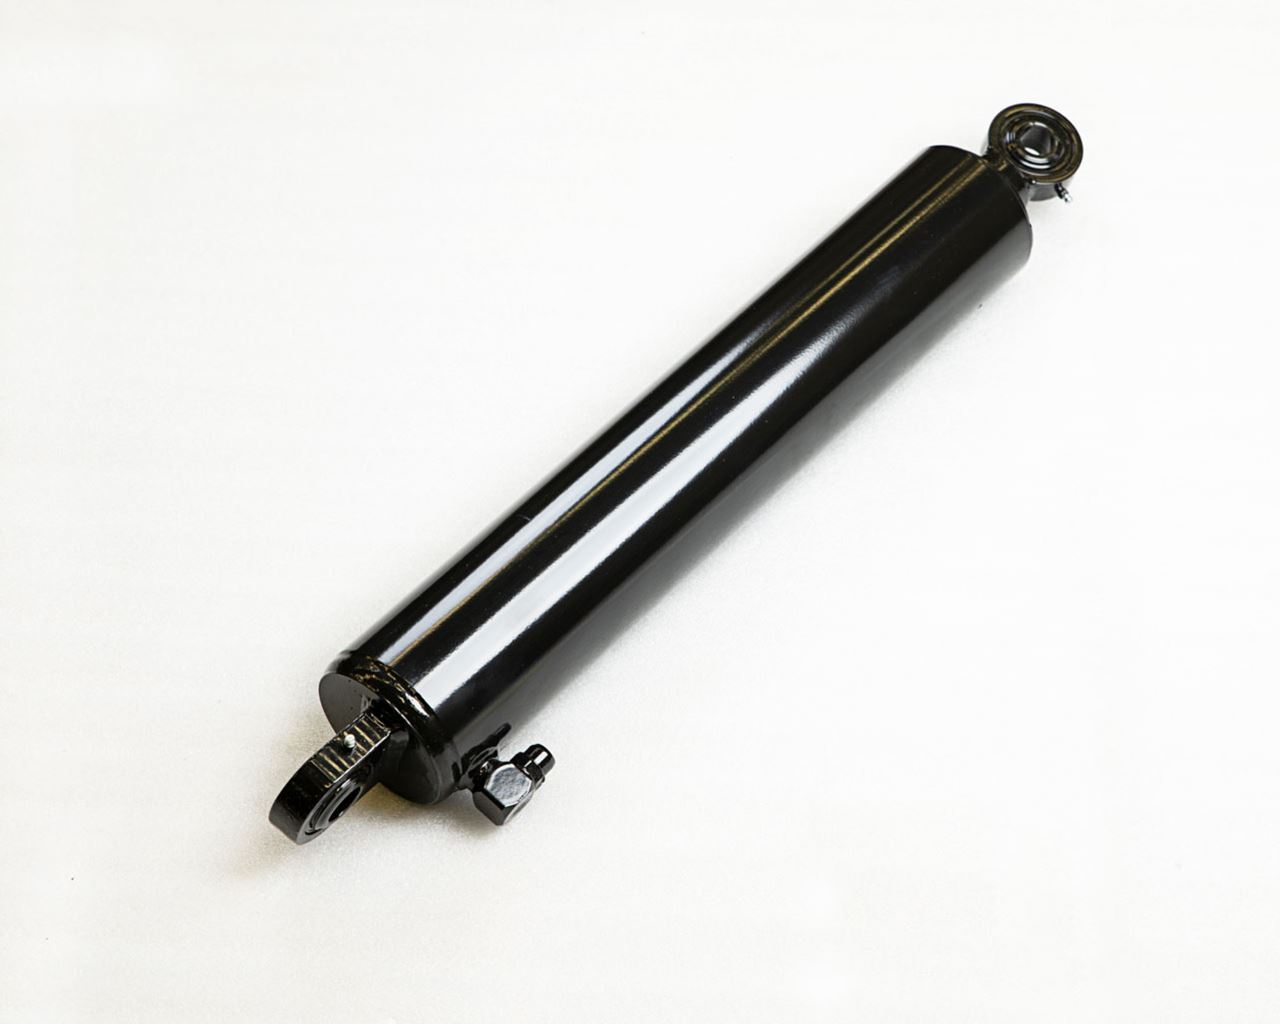 Lift table spare part - Hydraulic cylinder HC100/50-450